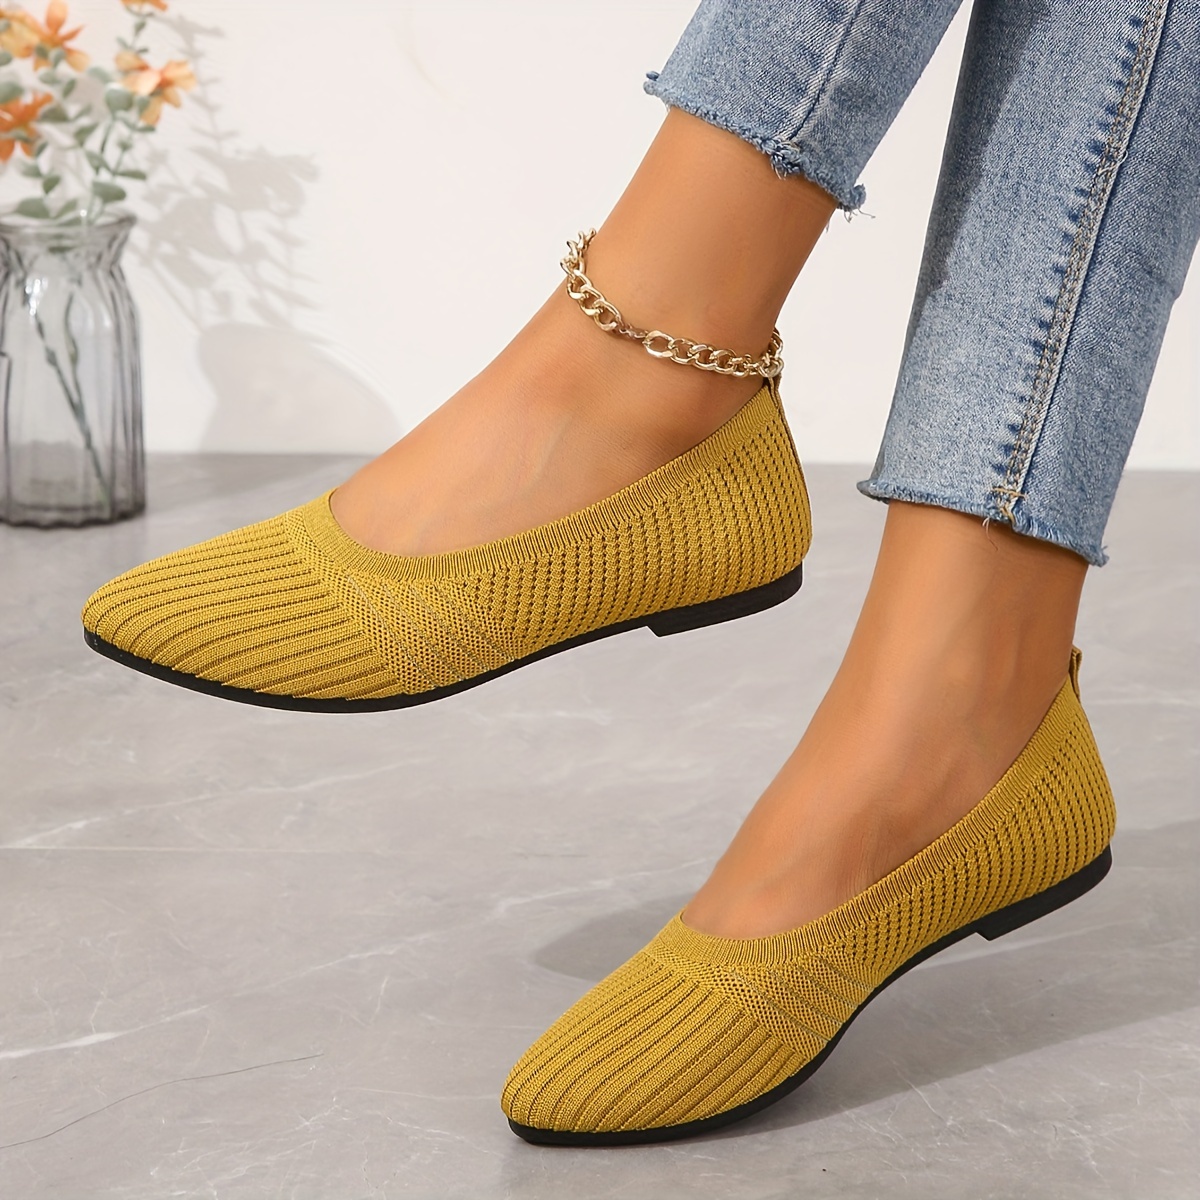 Women's Breathable Knit Flat Shoes, Casual Point Toe Slip On Shoes